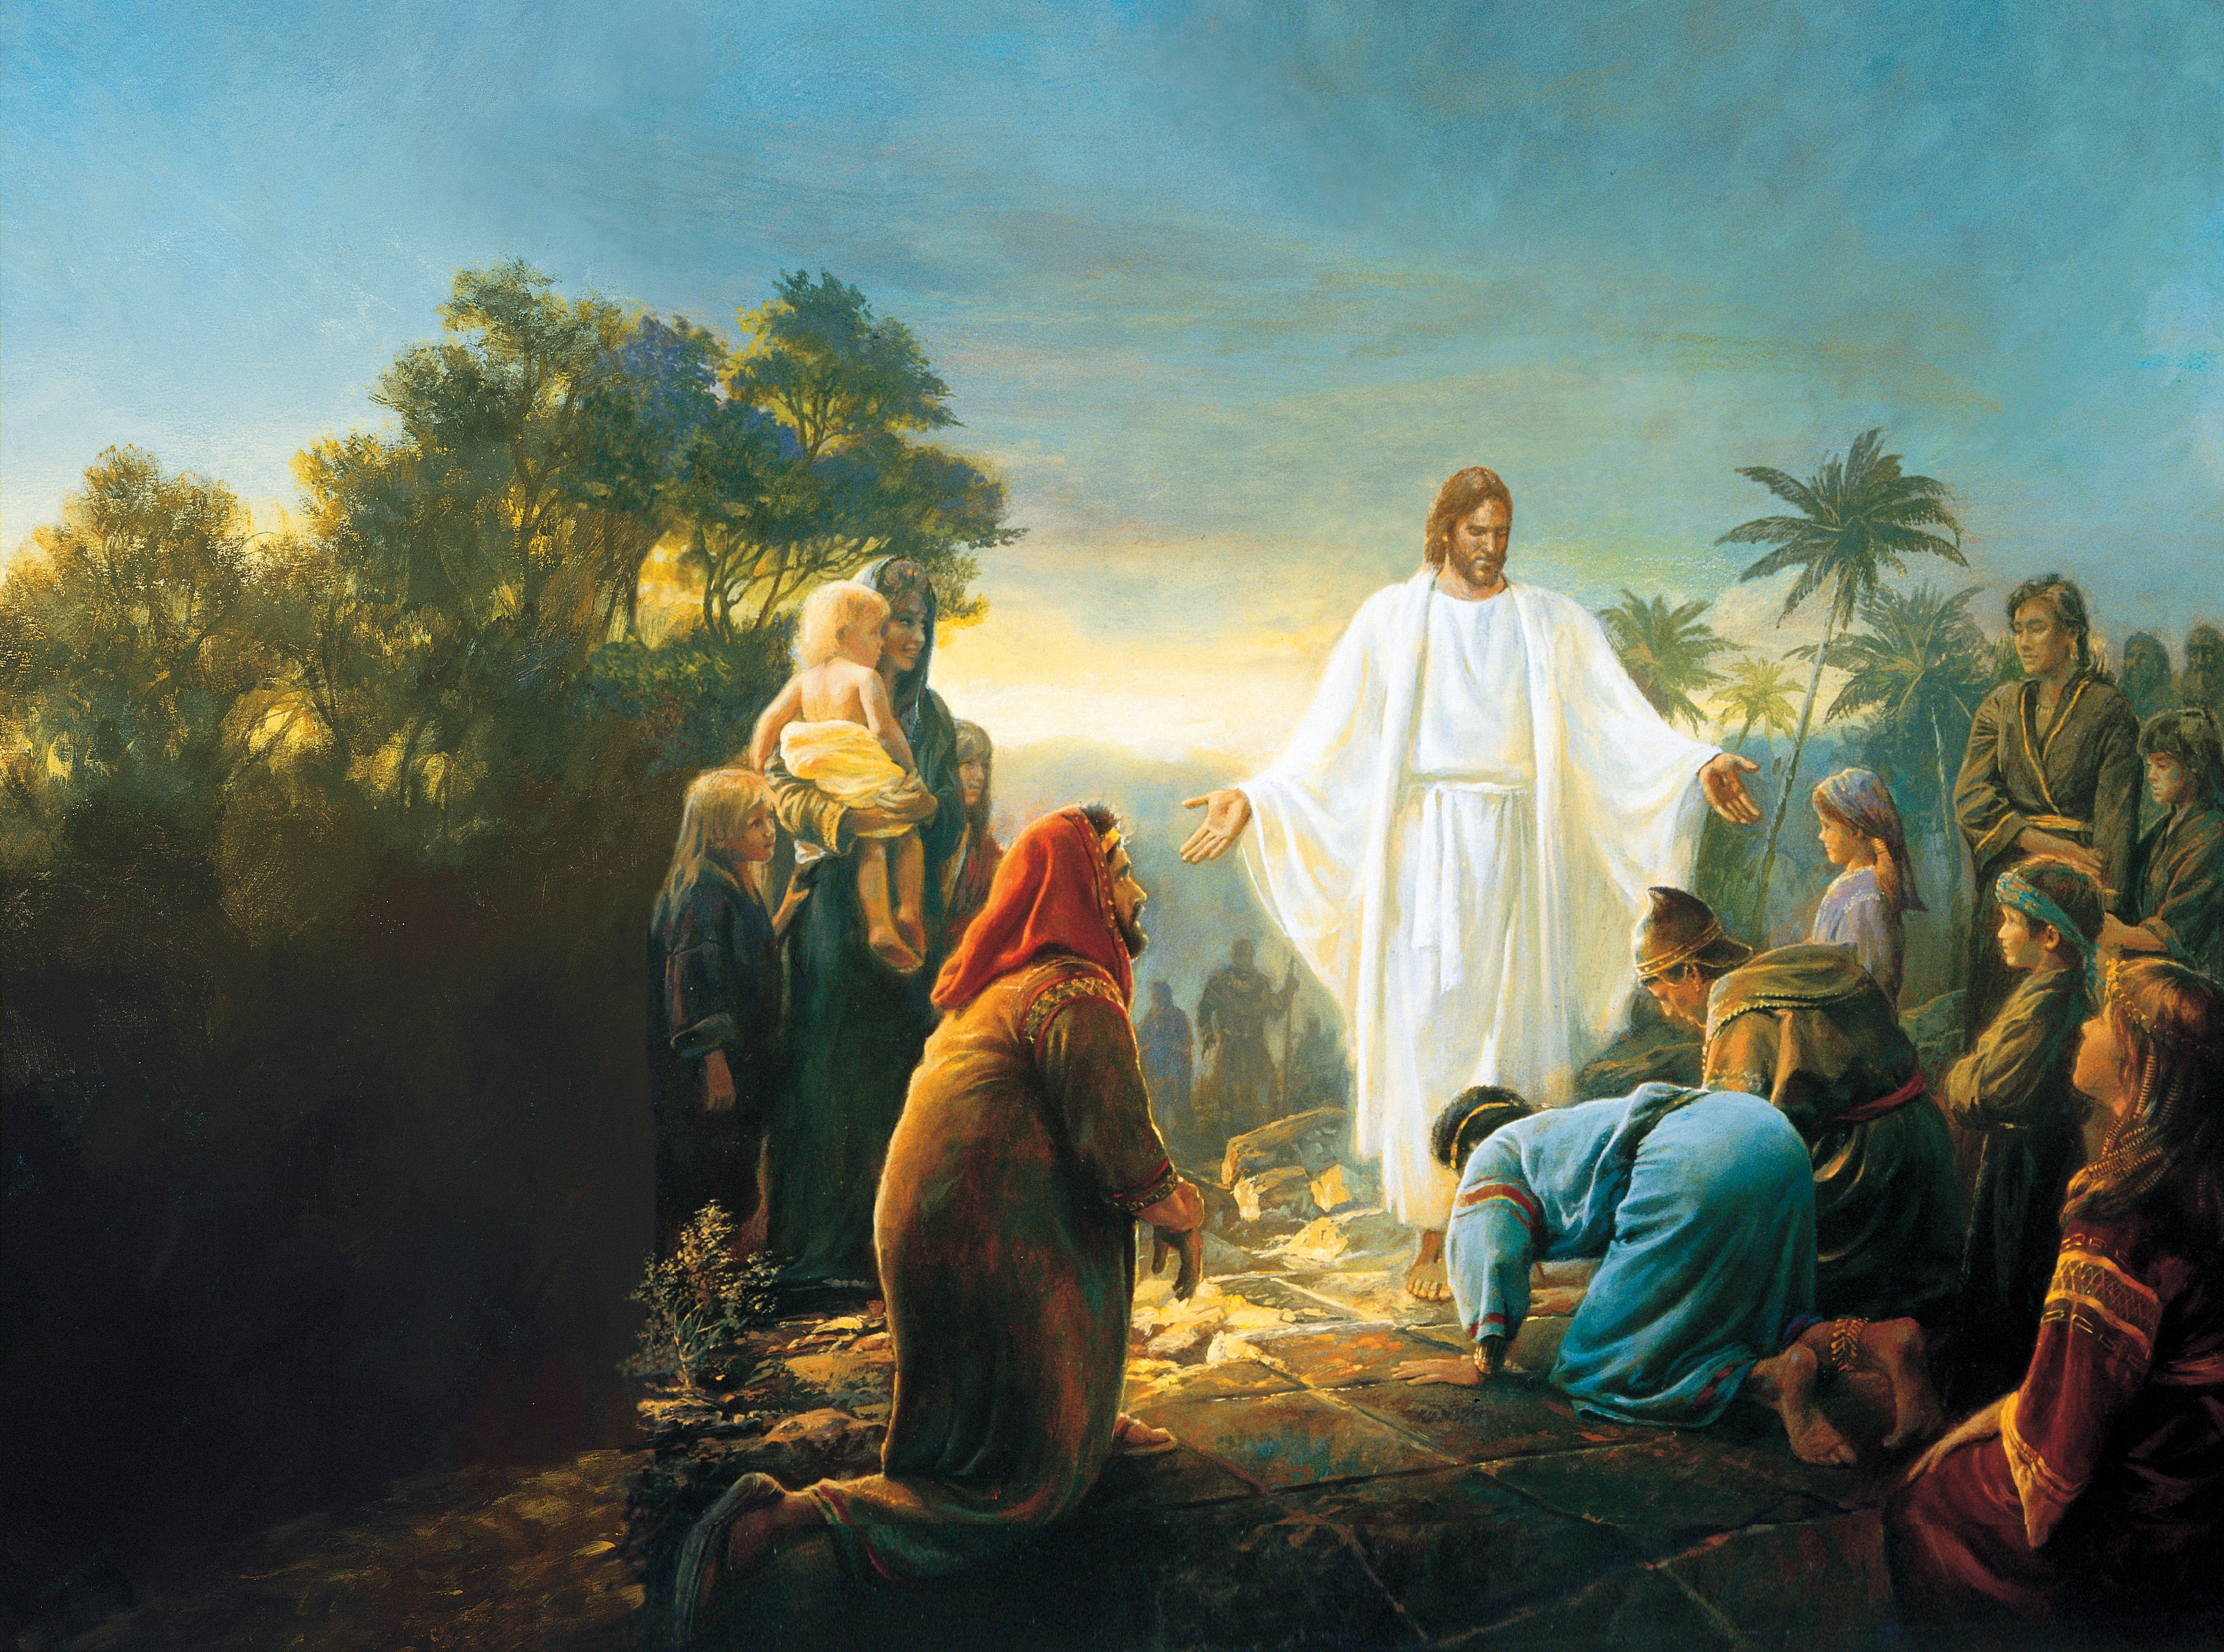 A painting showing Christ visiting the Nephites in the Book of Mormon after his death.